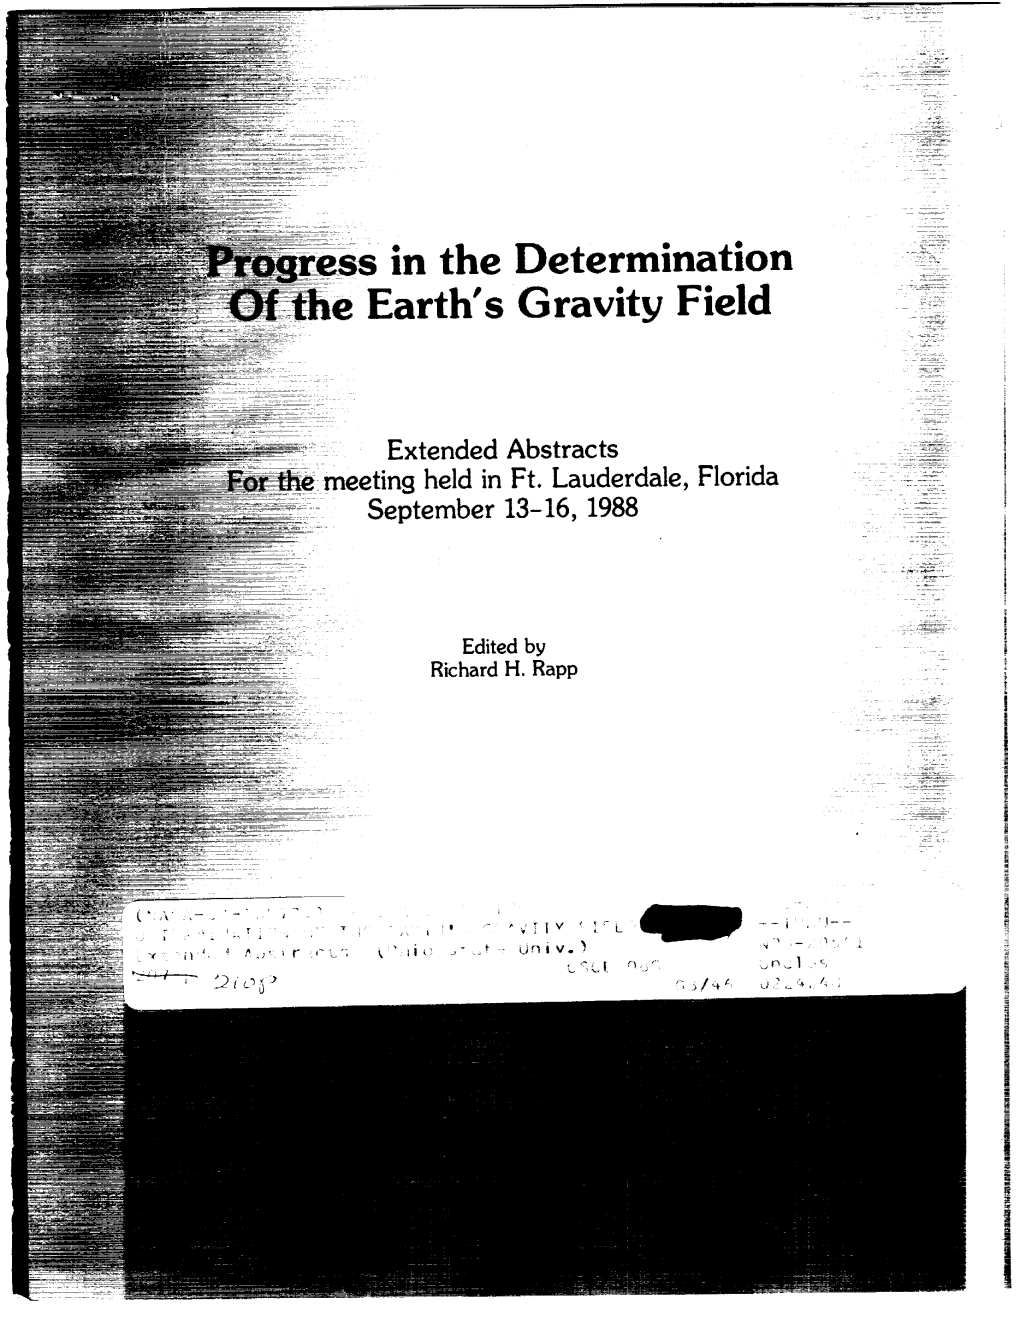 In the Determination Earth's Gravity Field